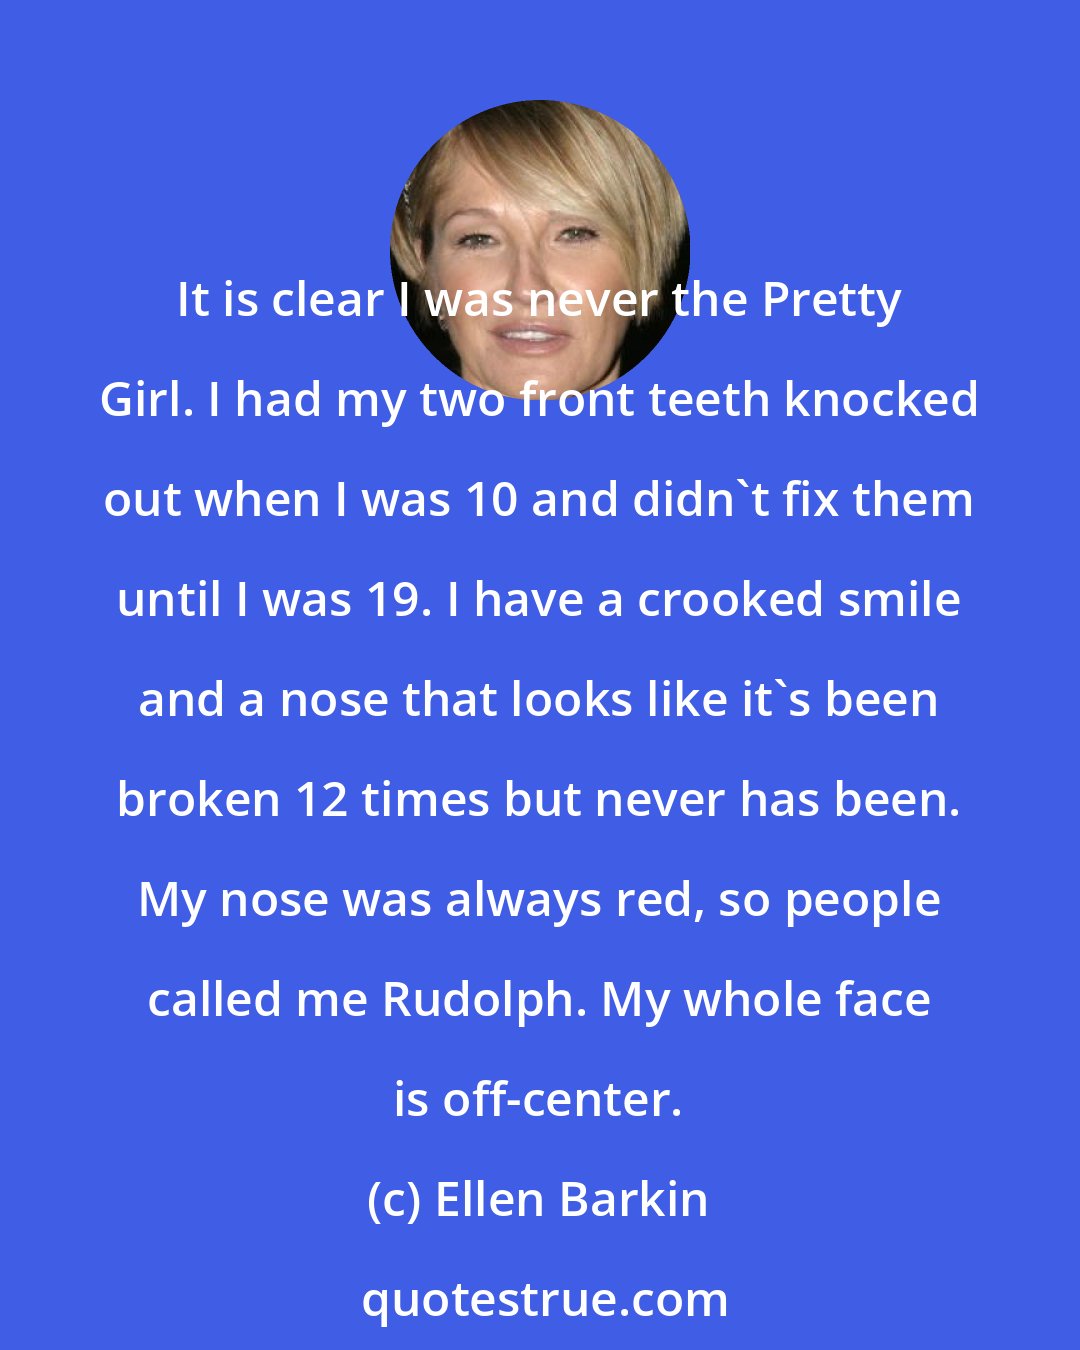 Ellen Barkin: It is clear I was never the Pretty Girl. I had my two front teeth knocked out when I was 10 and didn't fix them until I was 19. I have a crooked smile and a nose that looks like it's been broken 12 times but never has been. My nose was always red, so people called me Rudolph. My whole face is off-center.